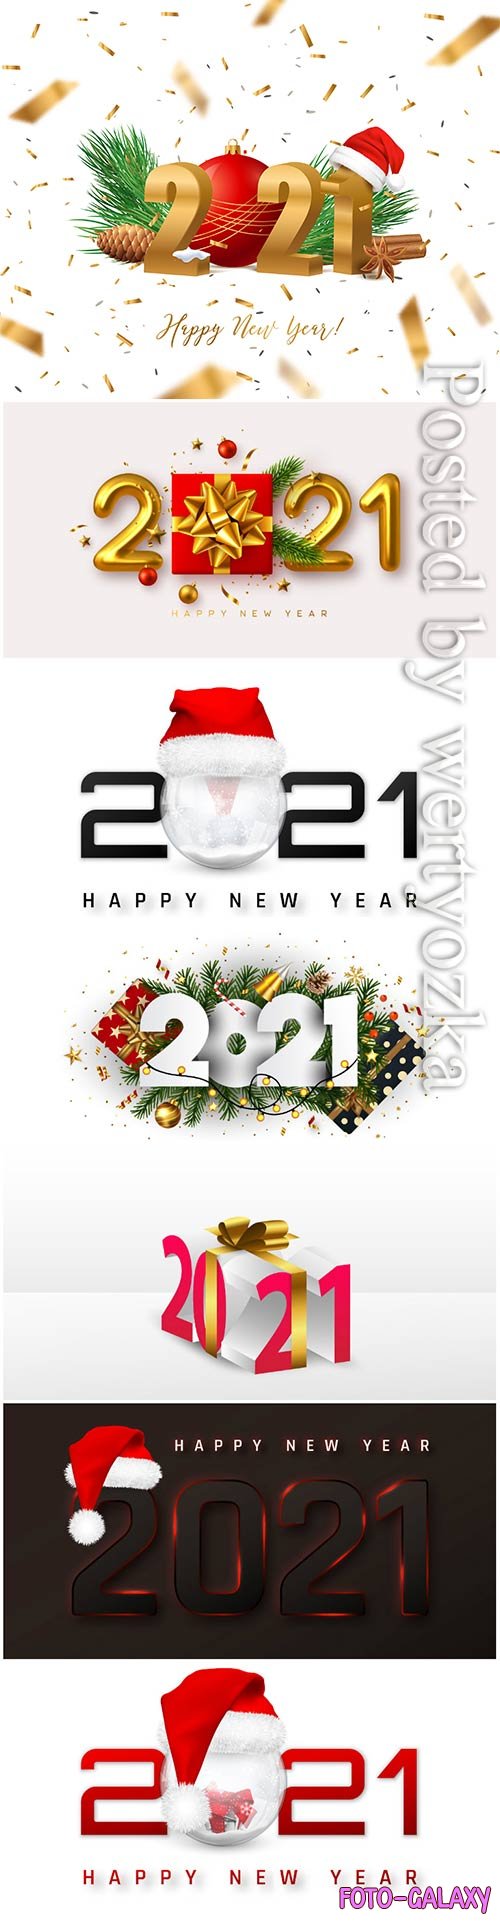 Happy new year 2021 cover with snowball in santa hat in vector